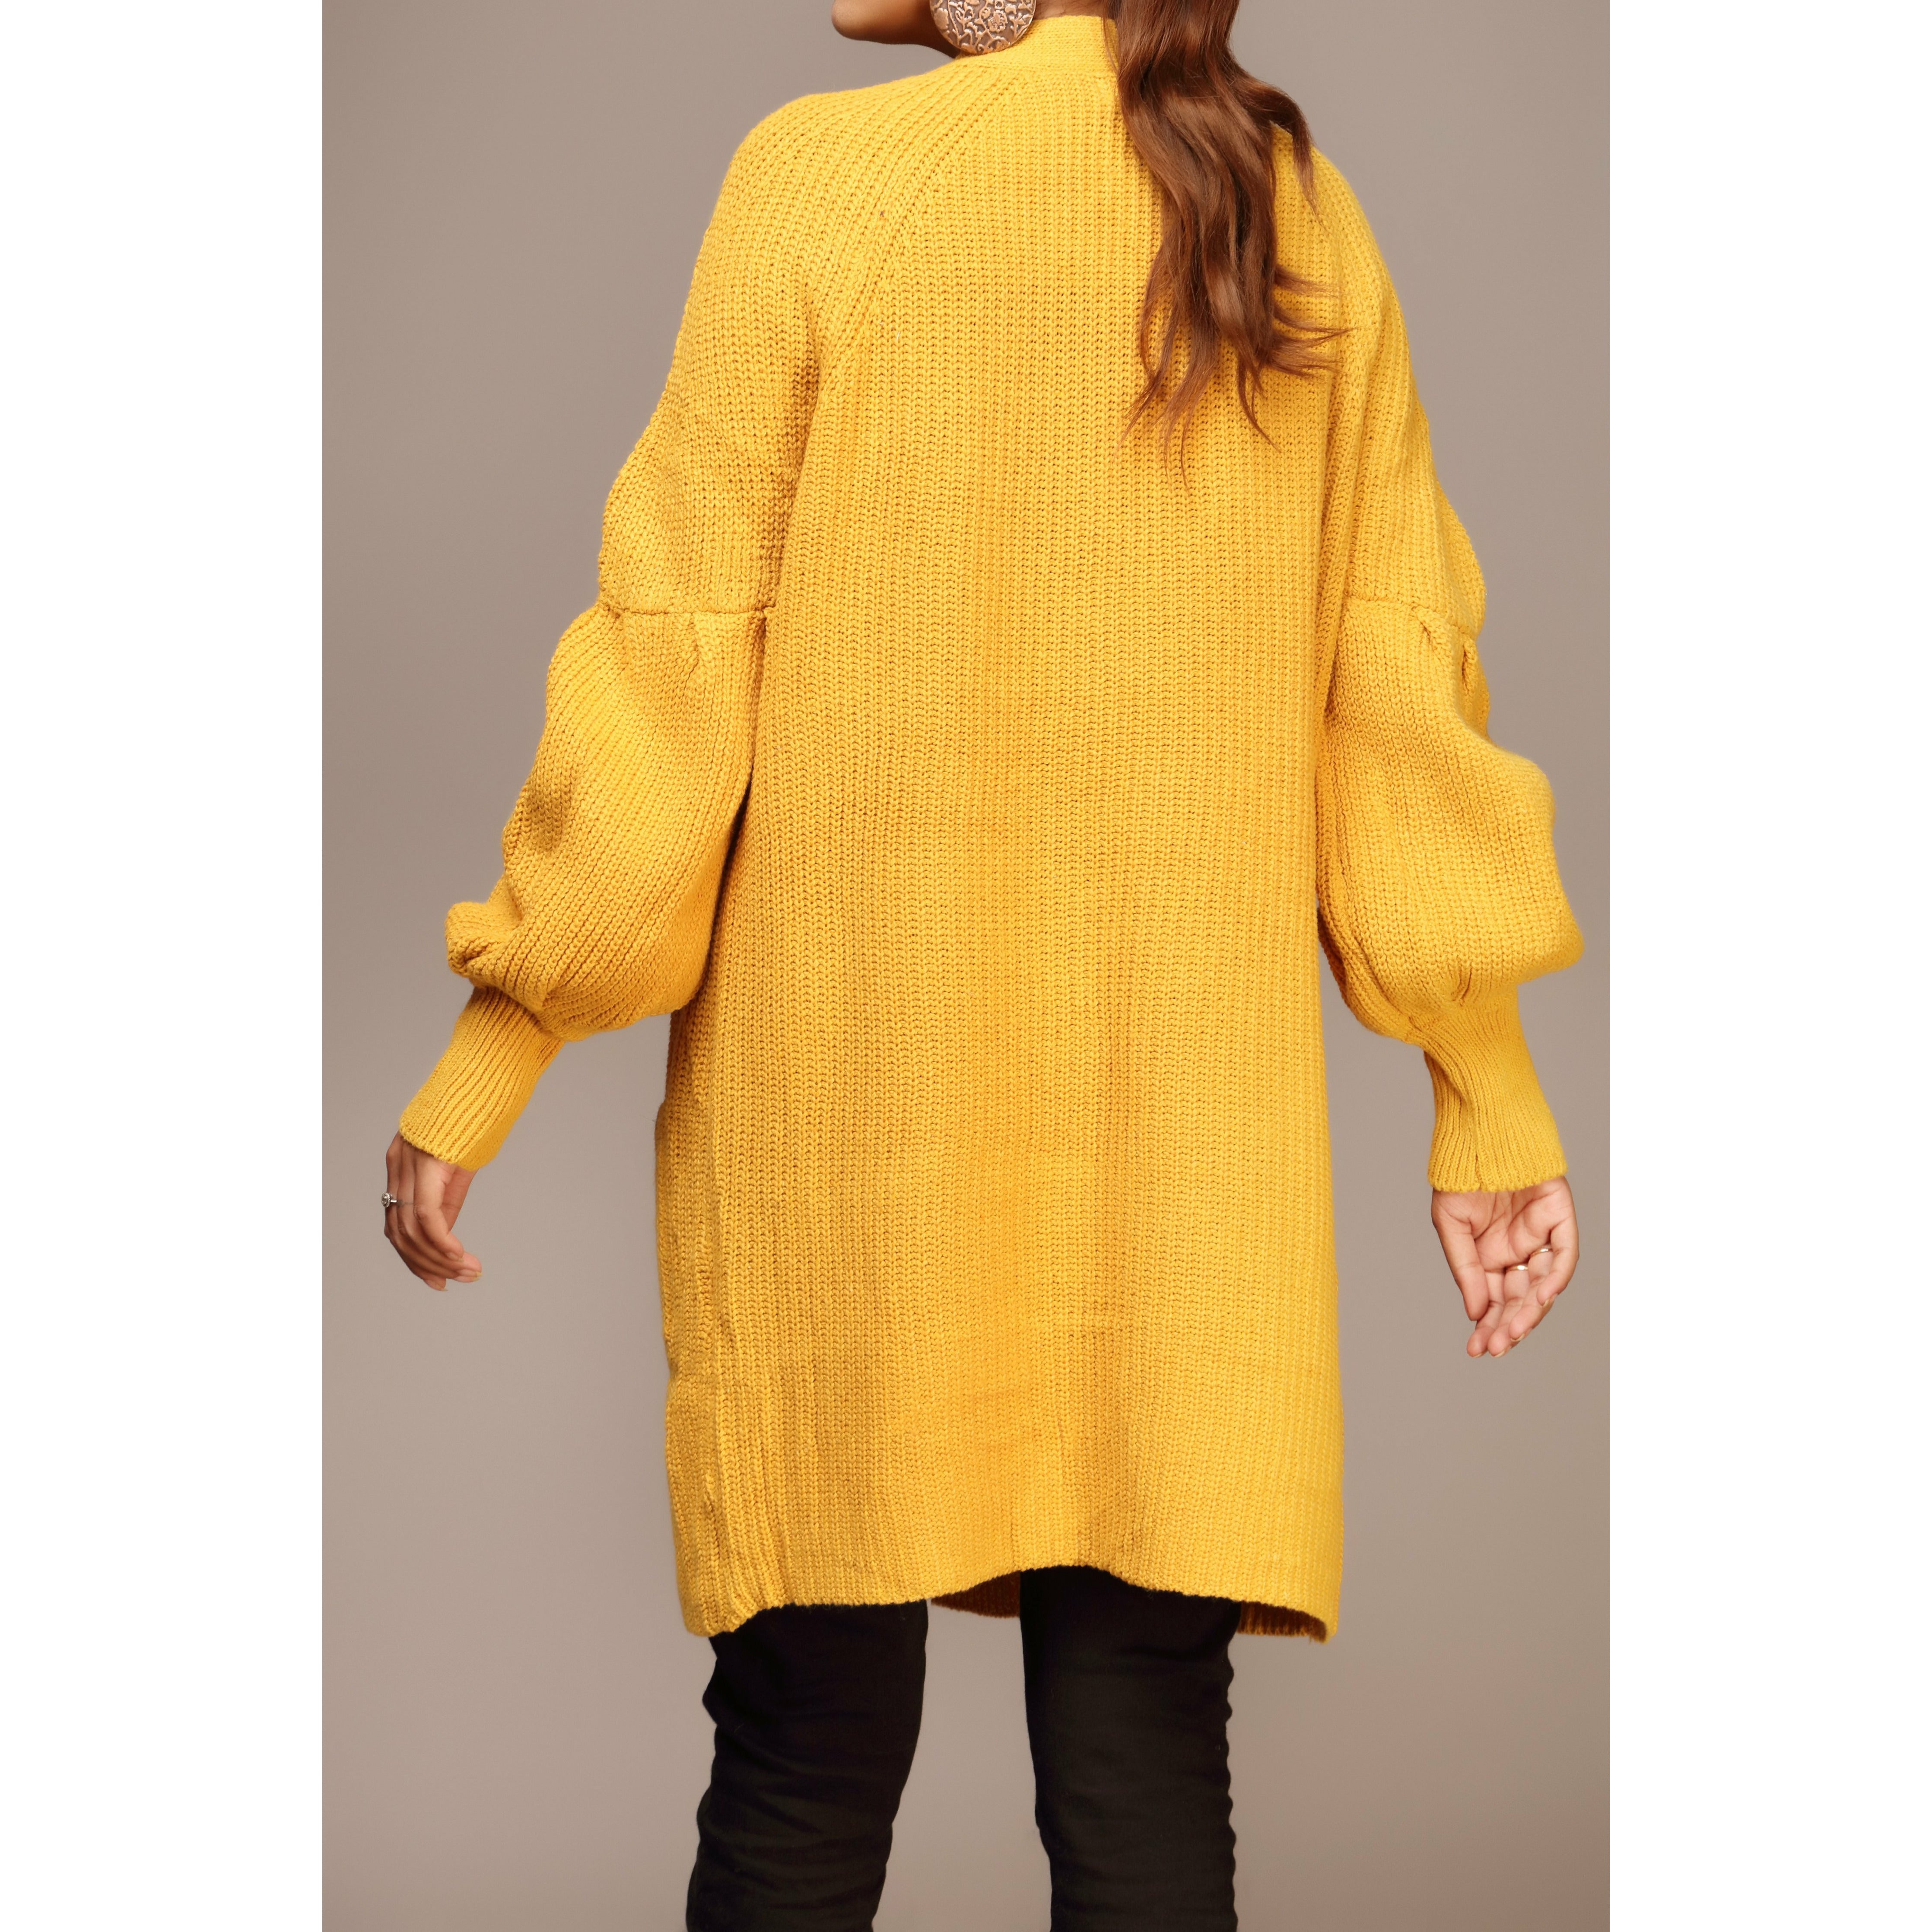 Yellow Color Long Cardigan PW1906